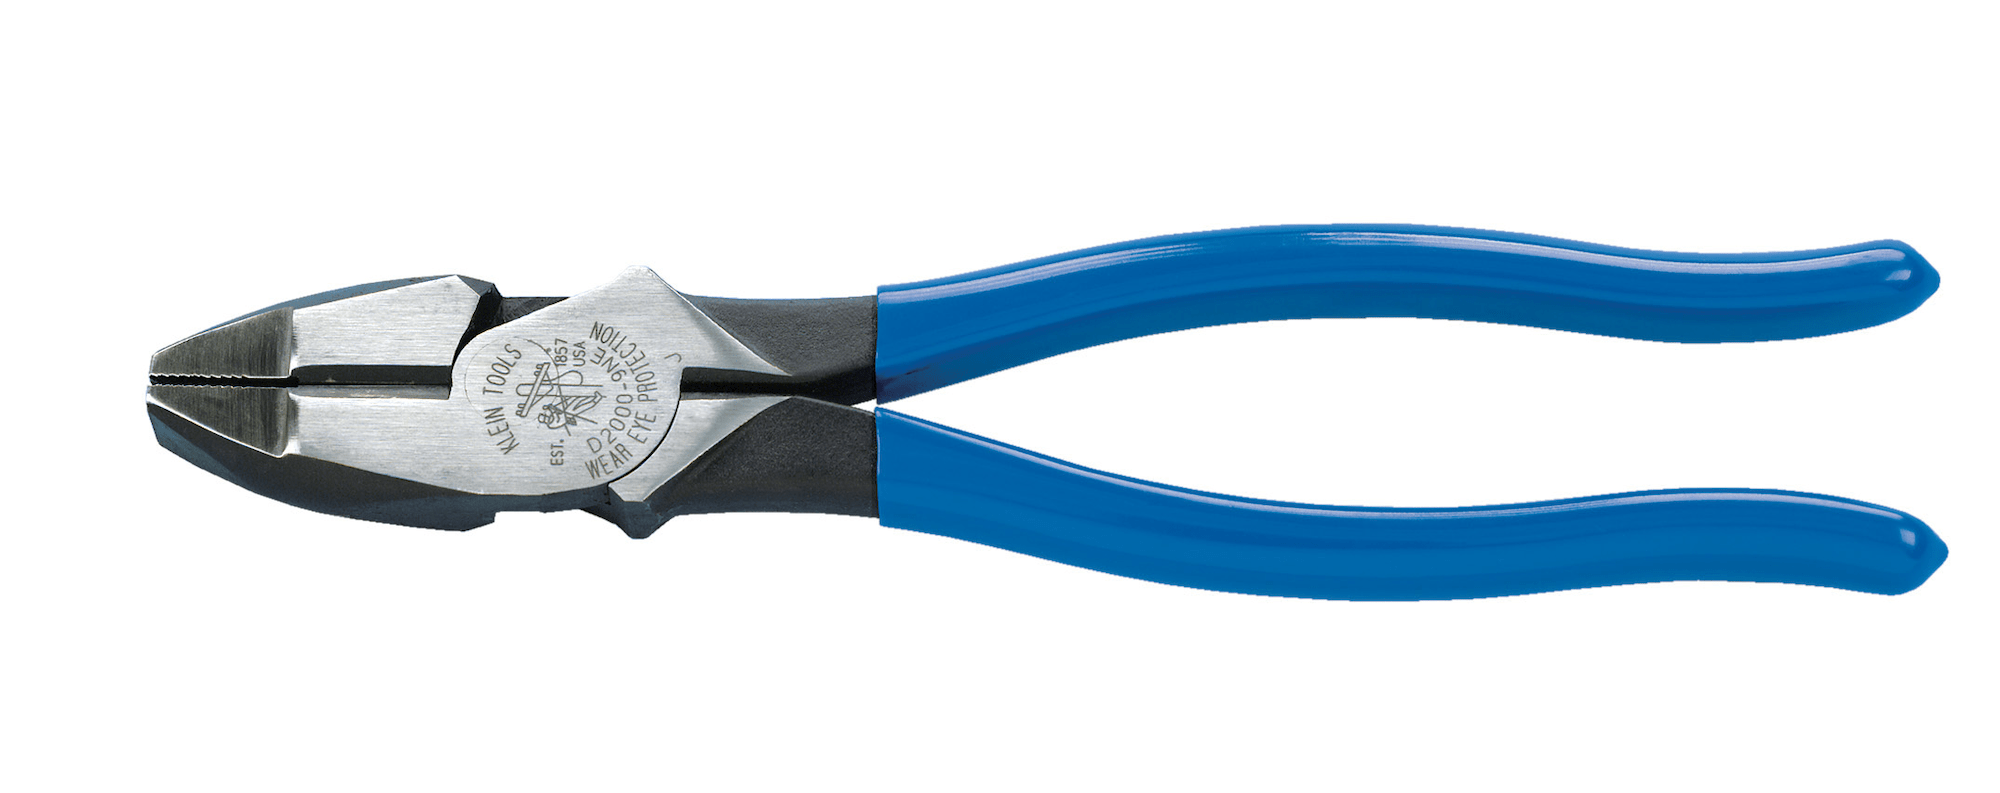 Supports for Wire Mesh and Rebar - Klein Pliers